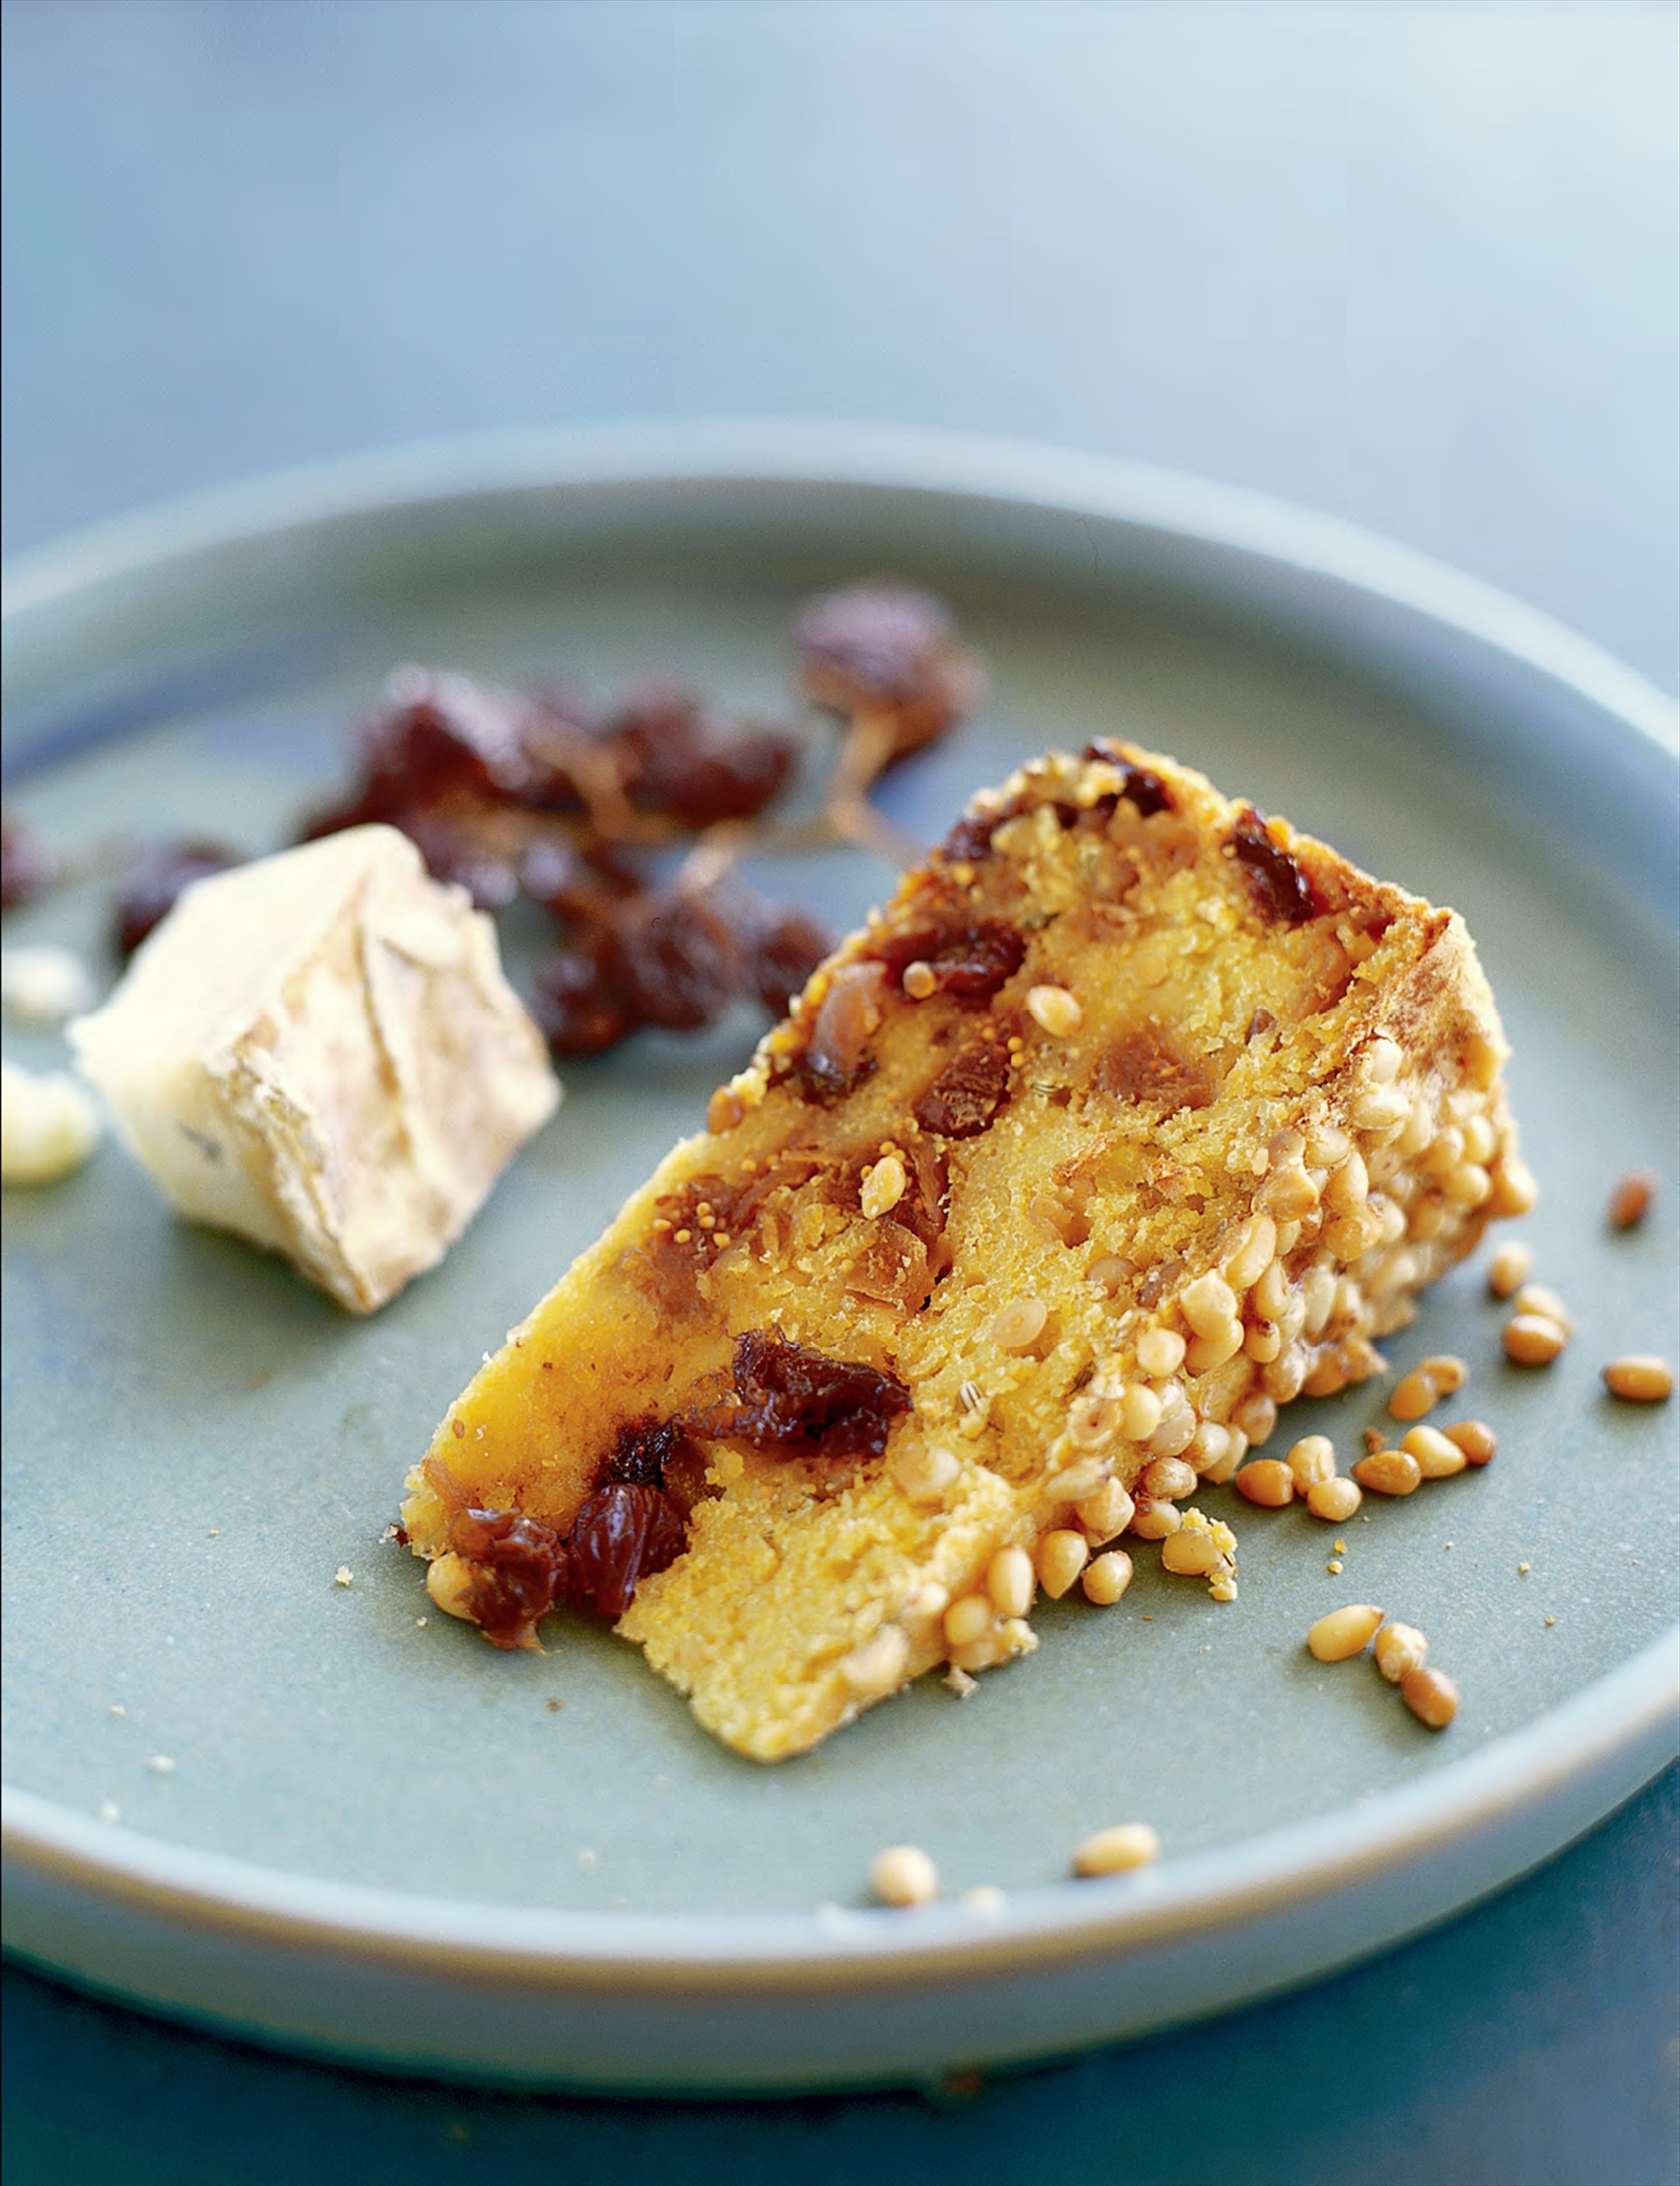 Polenta cake with pine nuts and dried fruit